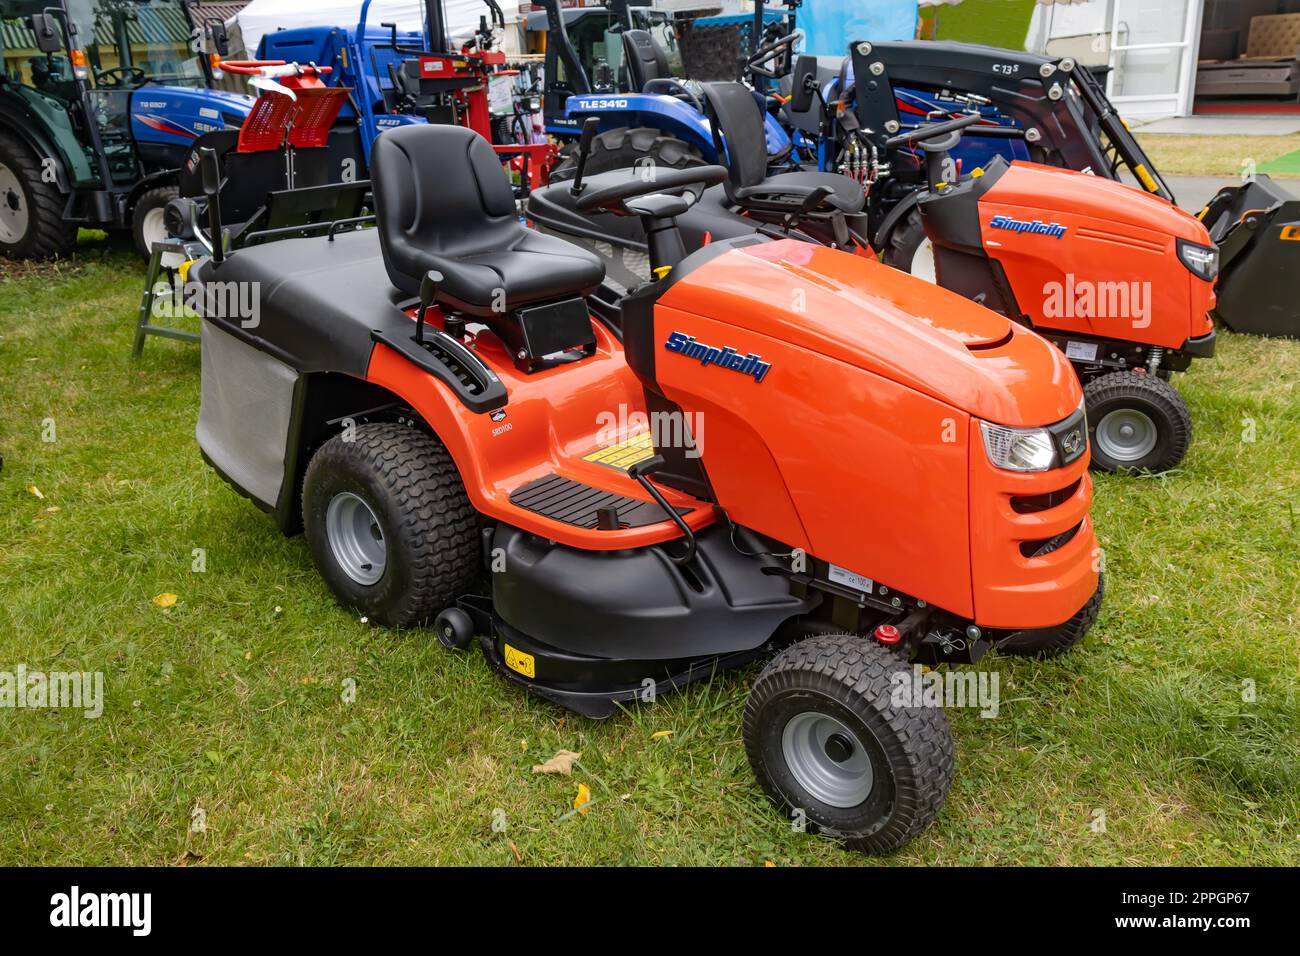 SIMPLICITY tractor lawn mower Stock Photo